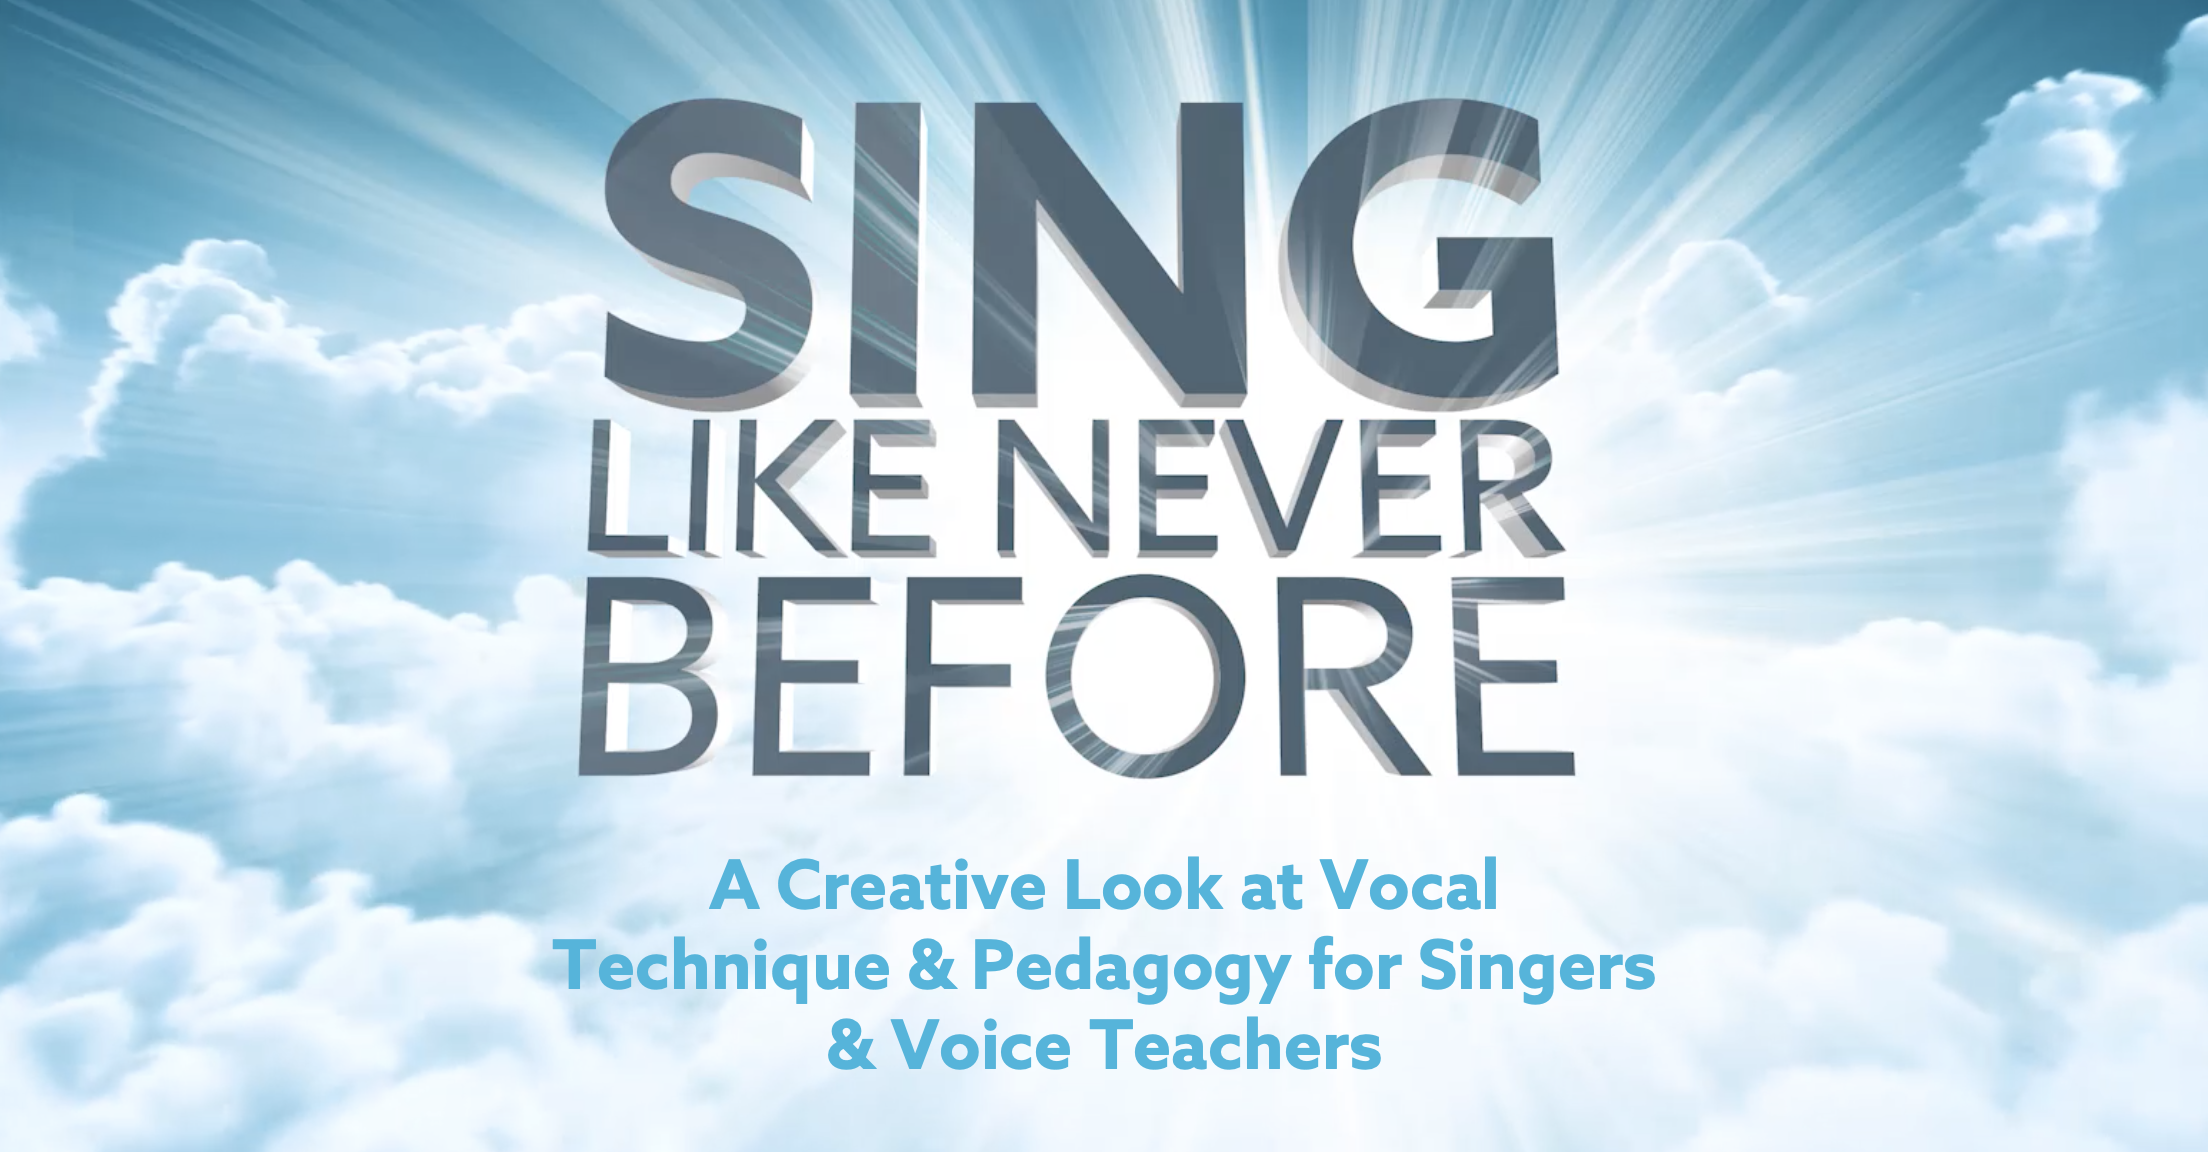 BroadwayWorld adds Sing Like Never Before to Fall Reading List hero